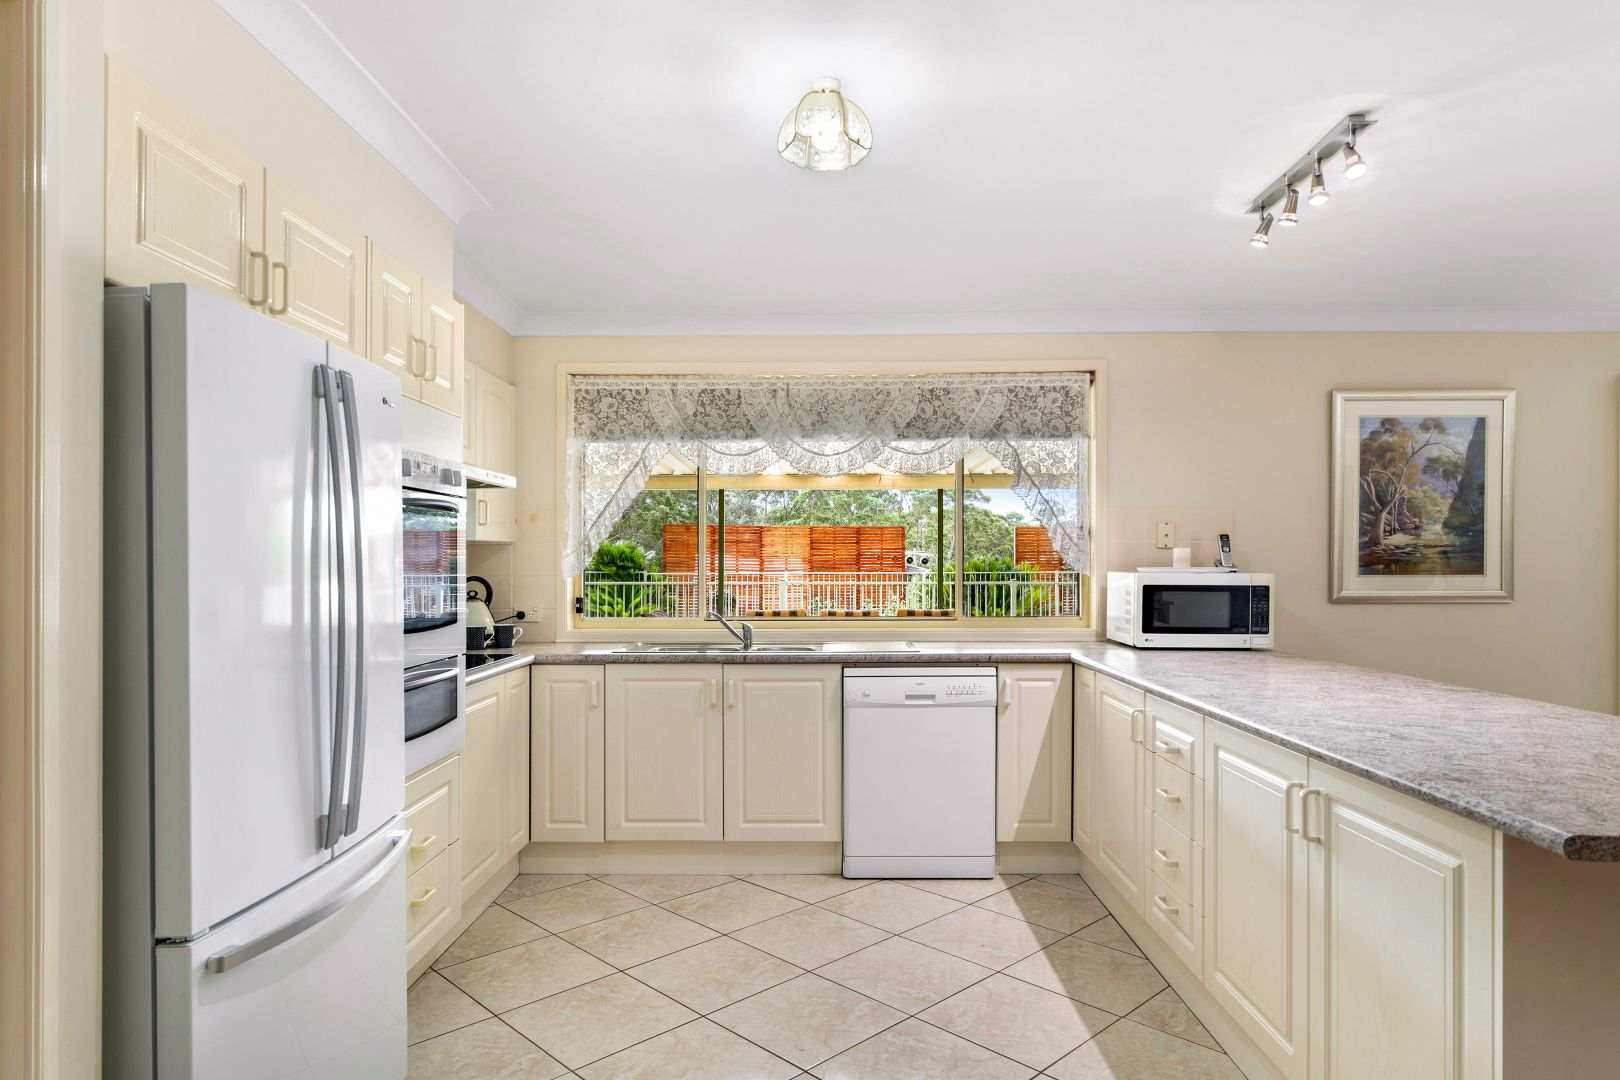 31 Golfcourse Way, Sussex Inlet NSW 2540, Image 1